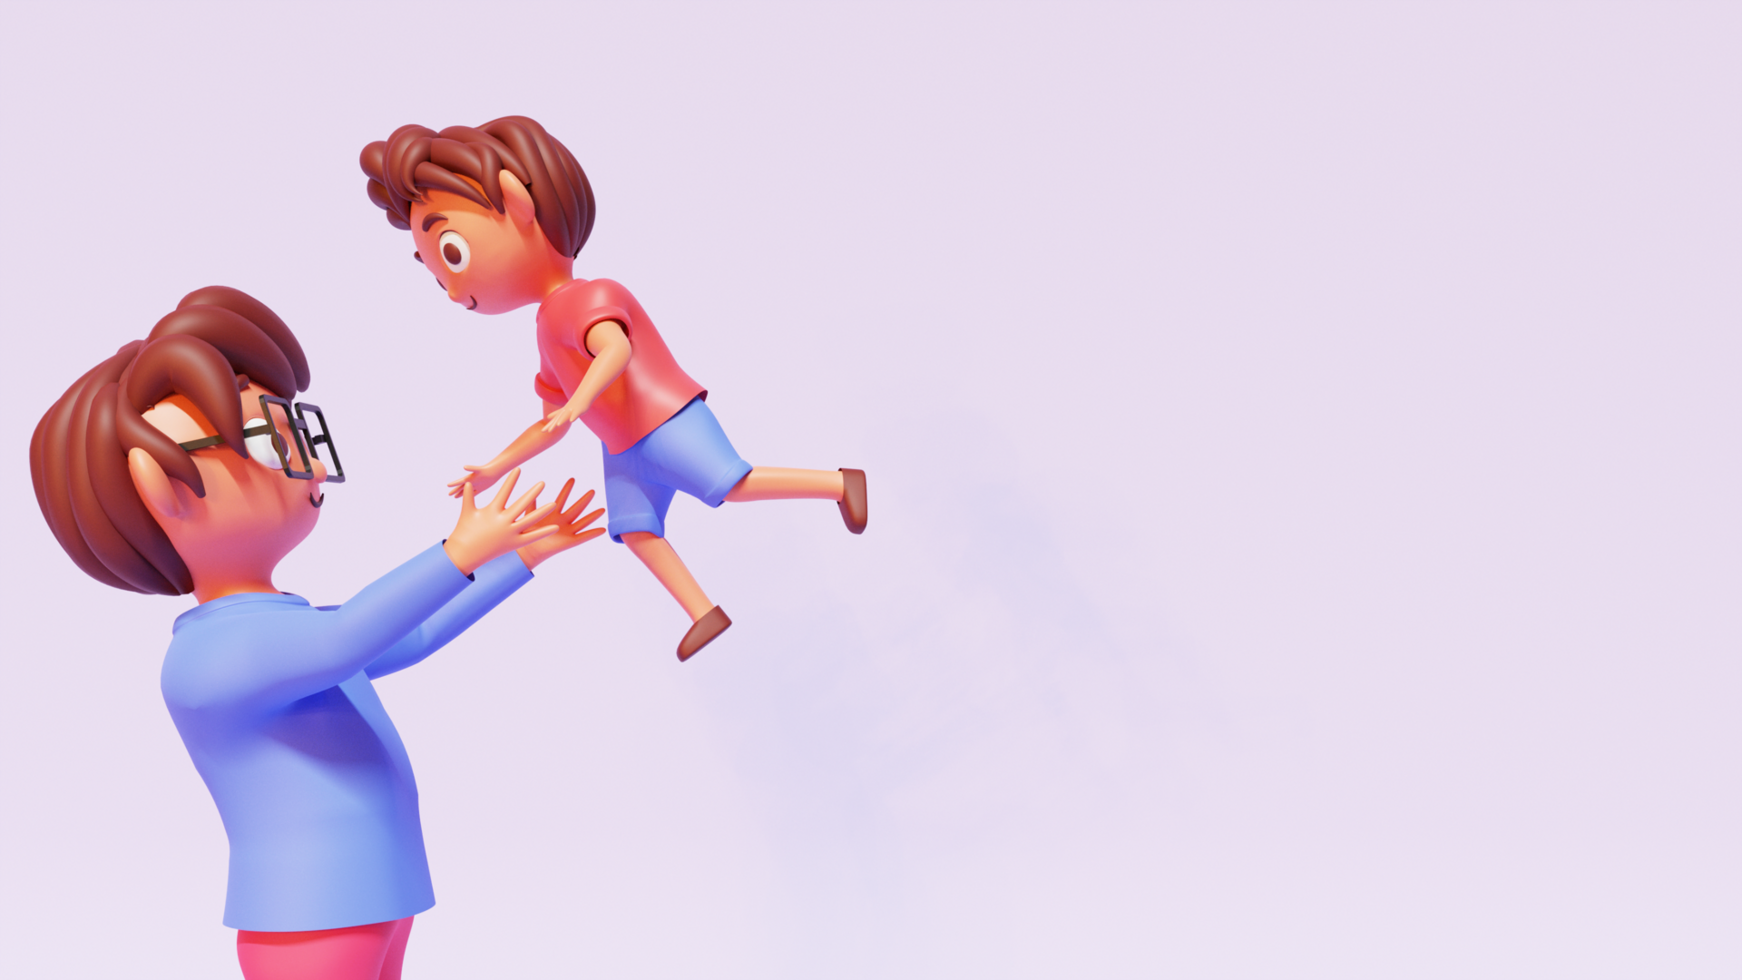 3D Illustration Of Father Throwing His Son On Pink Background With Copy Space. psd